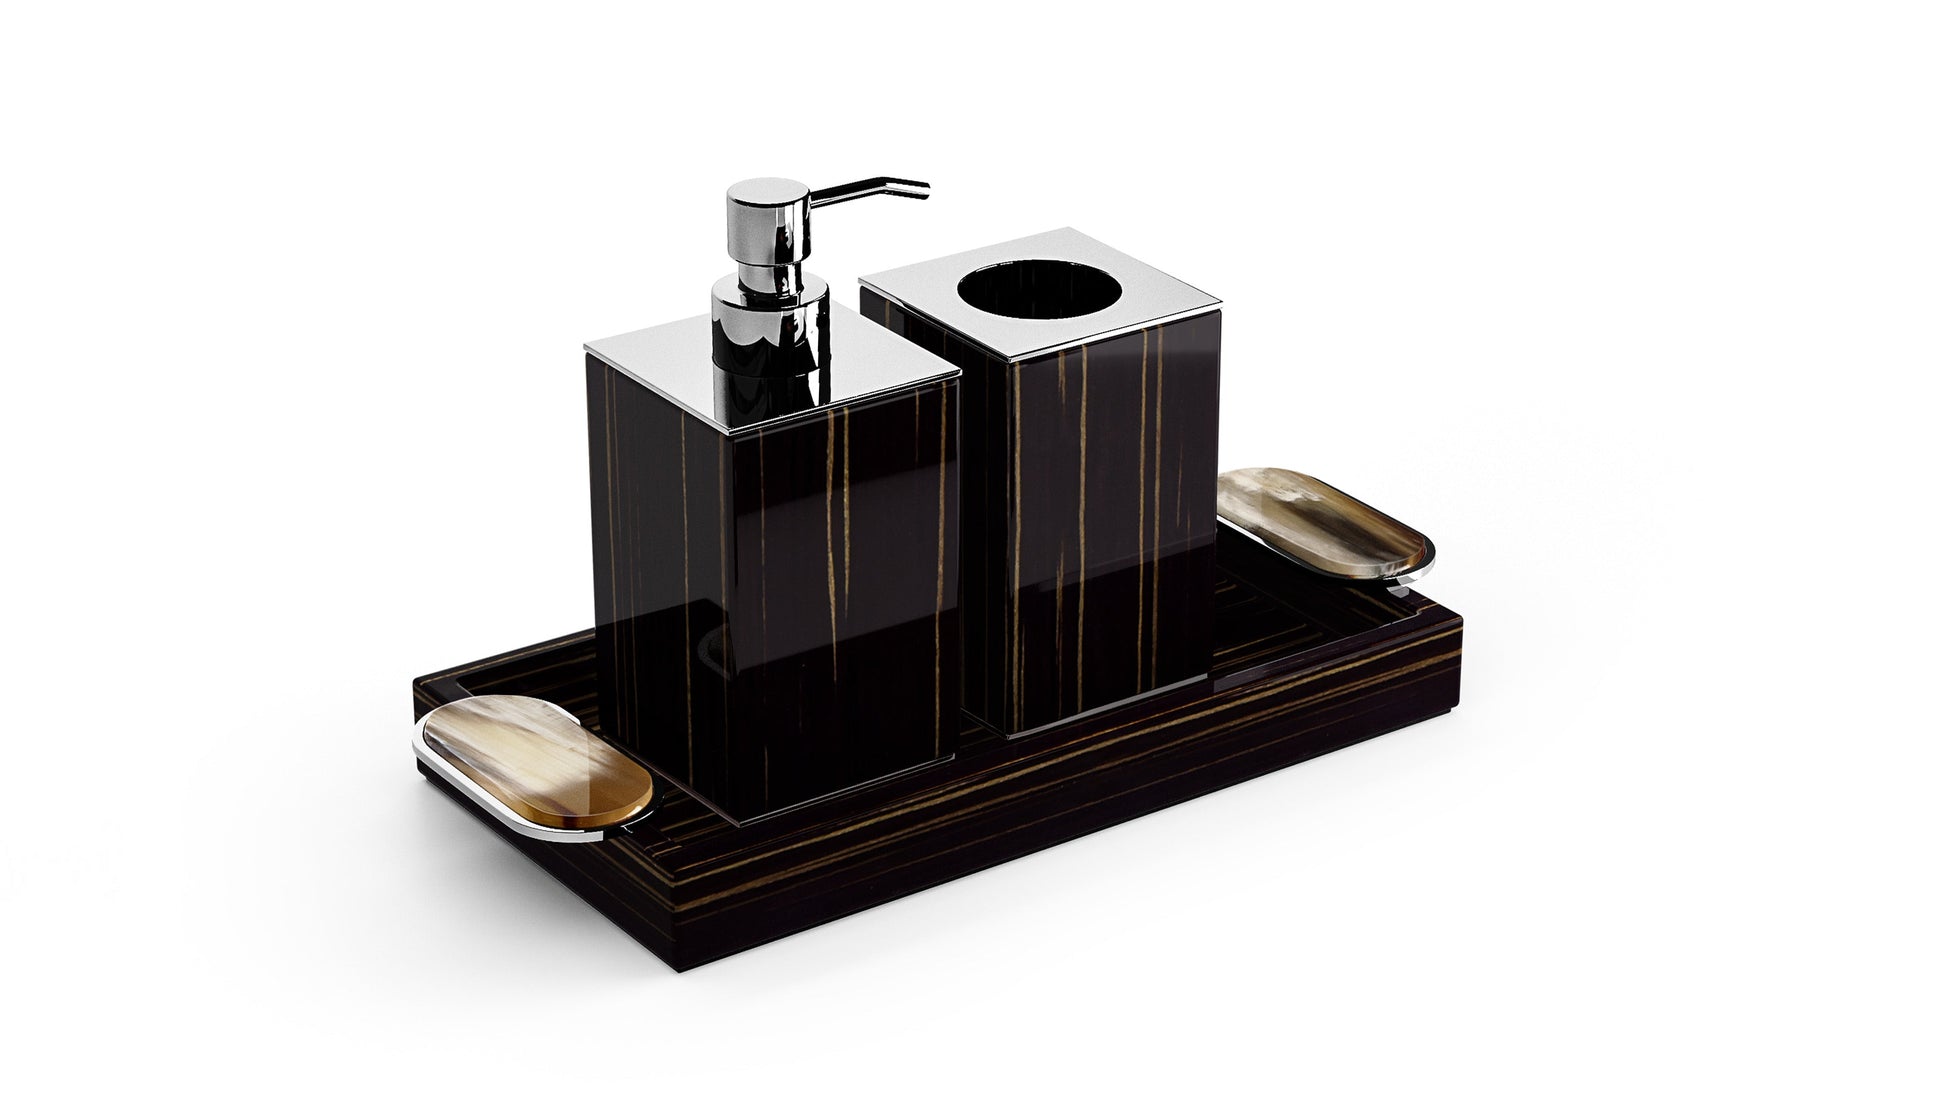 Arcahorn Argentella Toothbrush Holder | Glossy Ebony and Chromed Brass | Elegant Bathroom Accessory | Explore a Range of Luxury Home Accessories at 2Jour Concierge, #1 luxury high-end gift & lifestyle shop